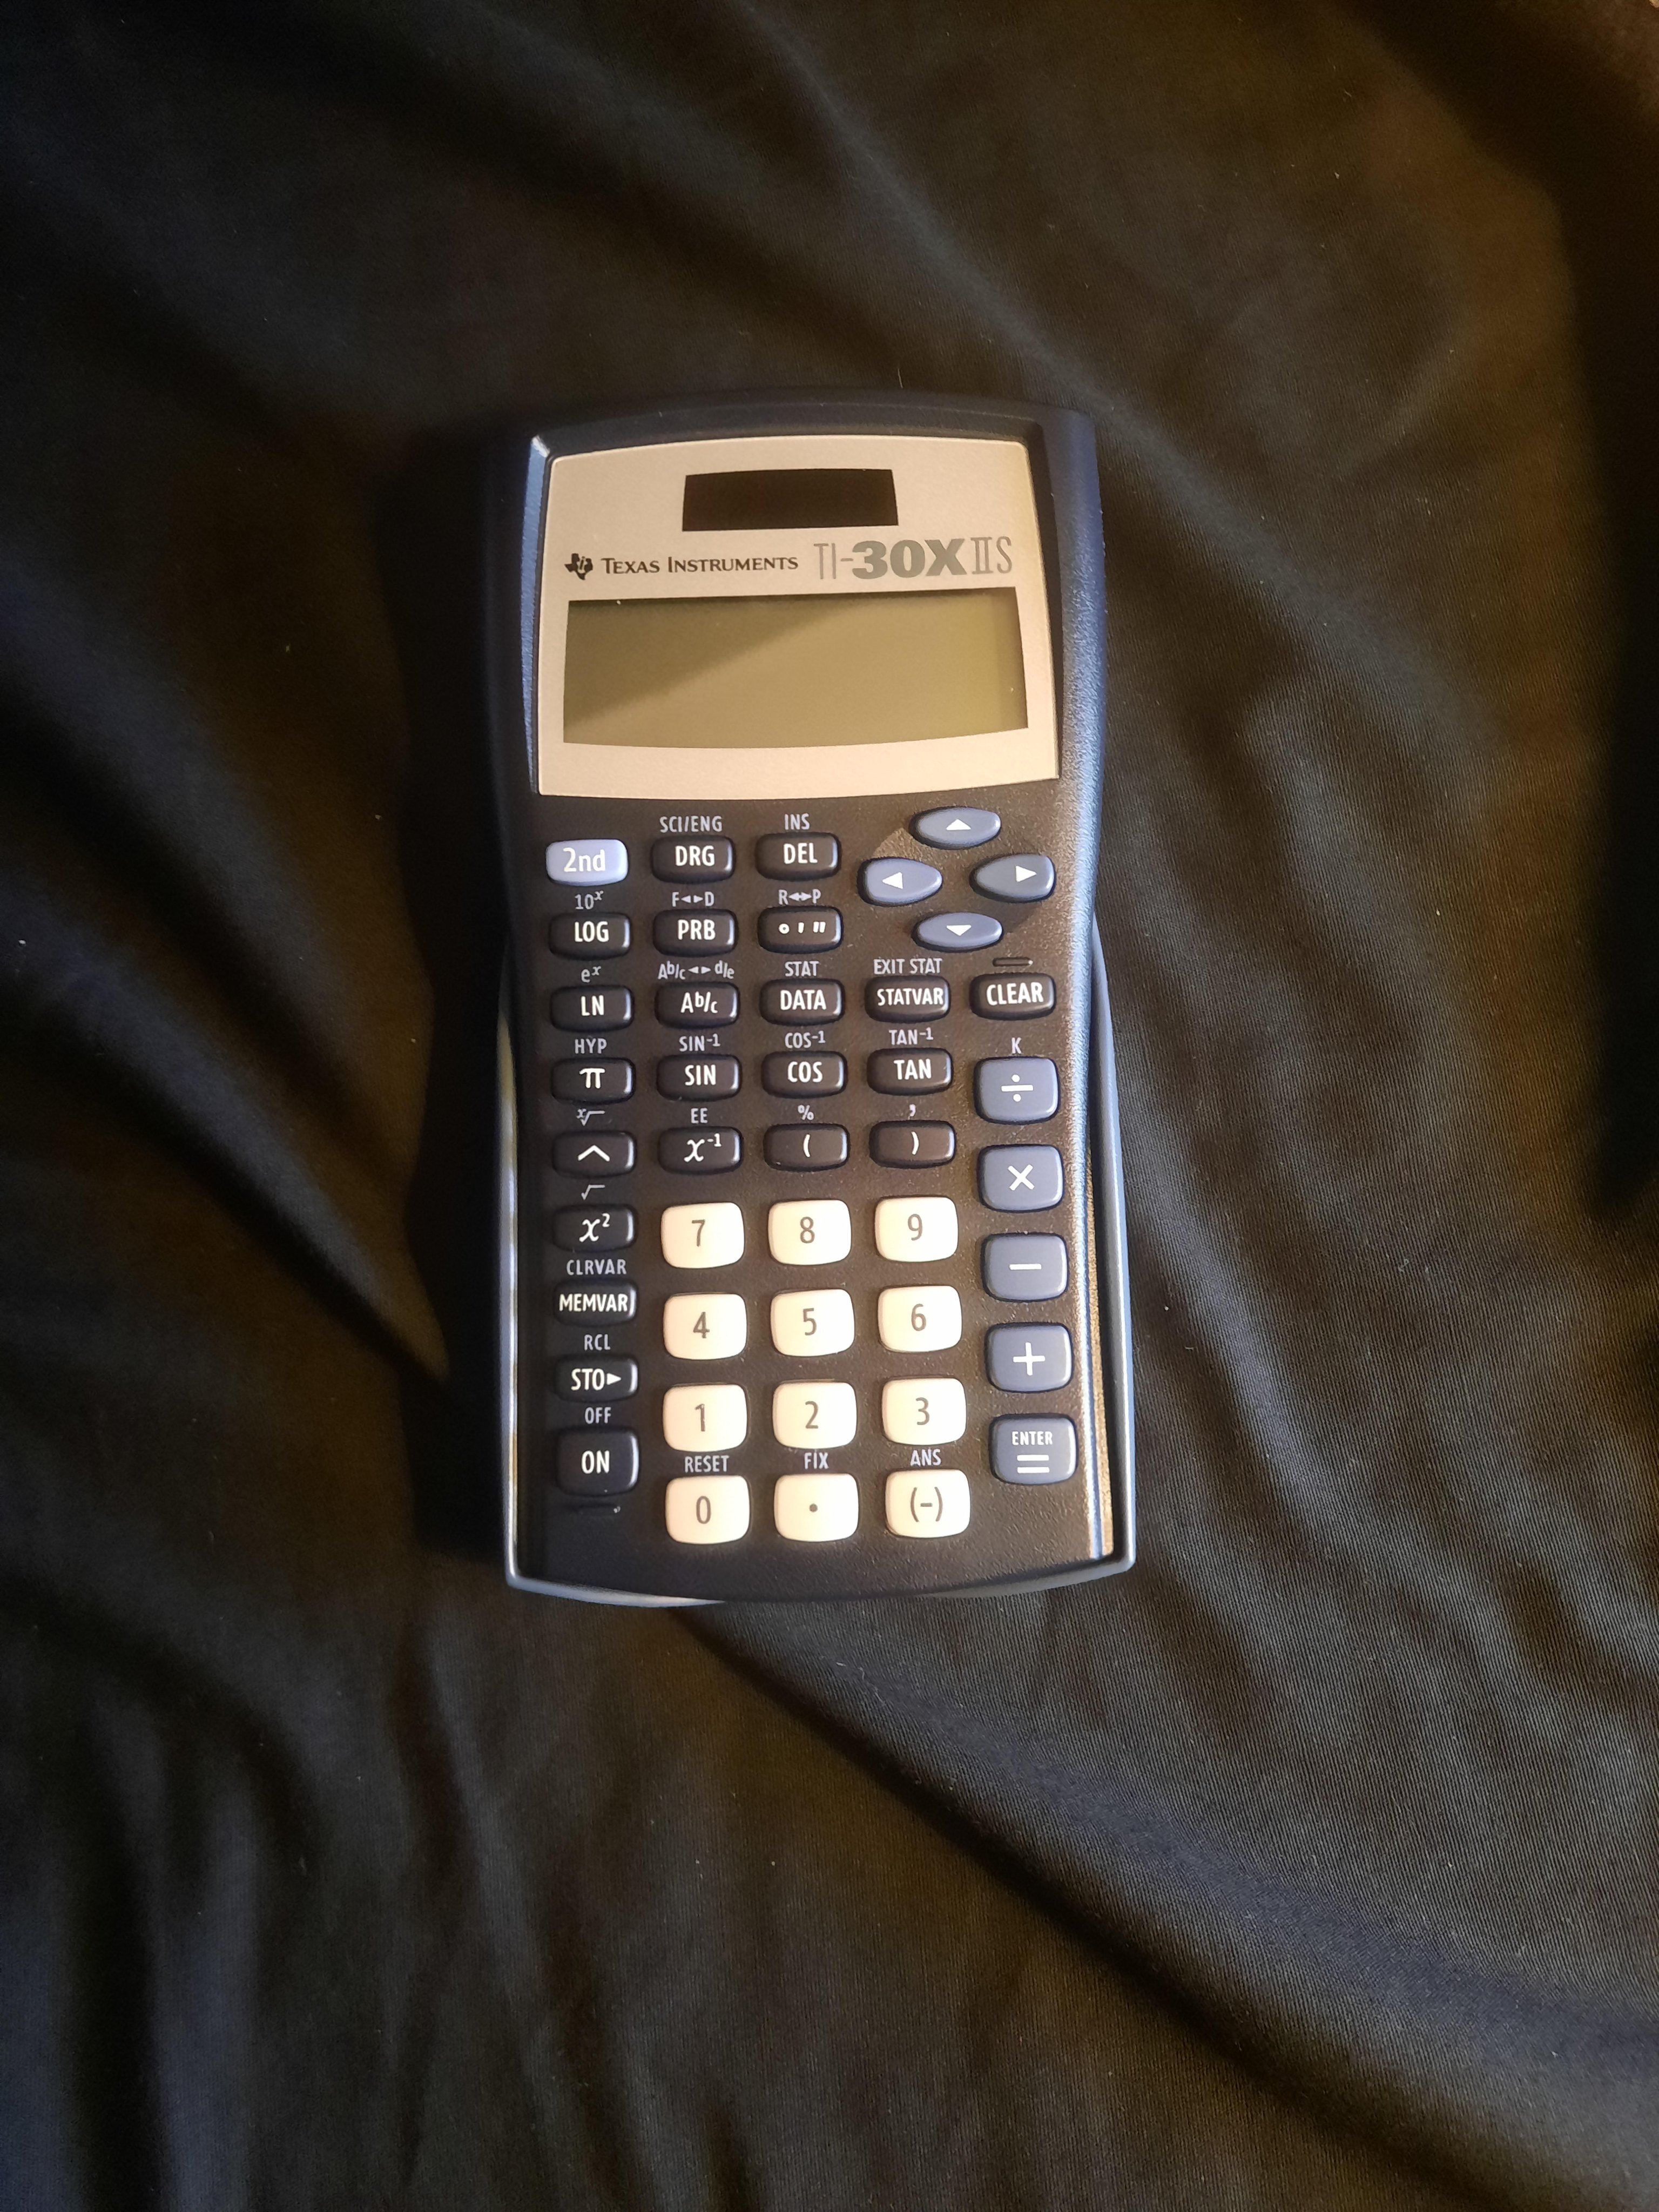 pasta adjective curb Memes Every 10 Minutes 😈😈😂😂 on Twitter: "You may have a girlfriend, but  I have a Texas Instruments TI-30X-IIS Fundamental Scientific Calculator # memes #memesdaily #meme #funny #humor https://t.co/FDtmkScxt7" / Twitter